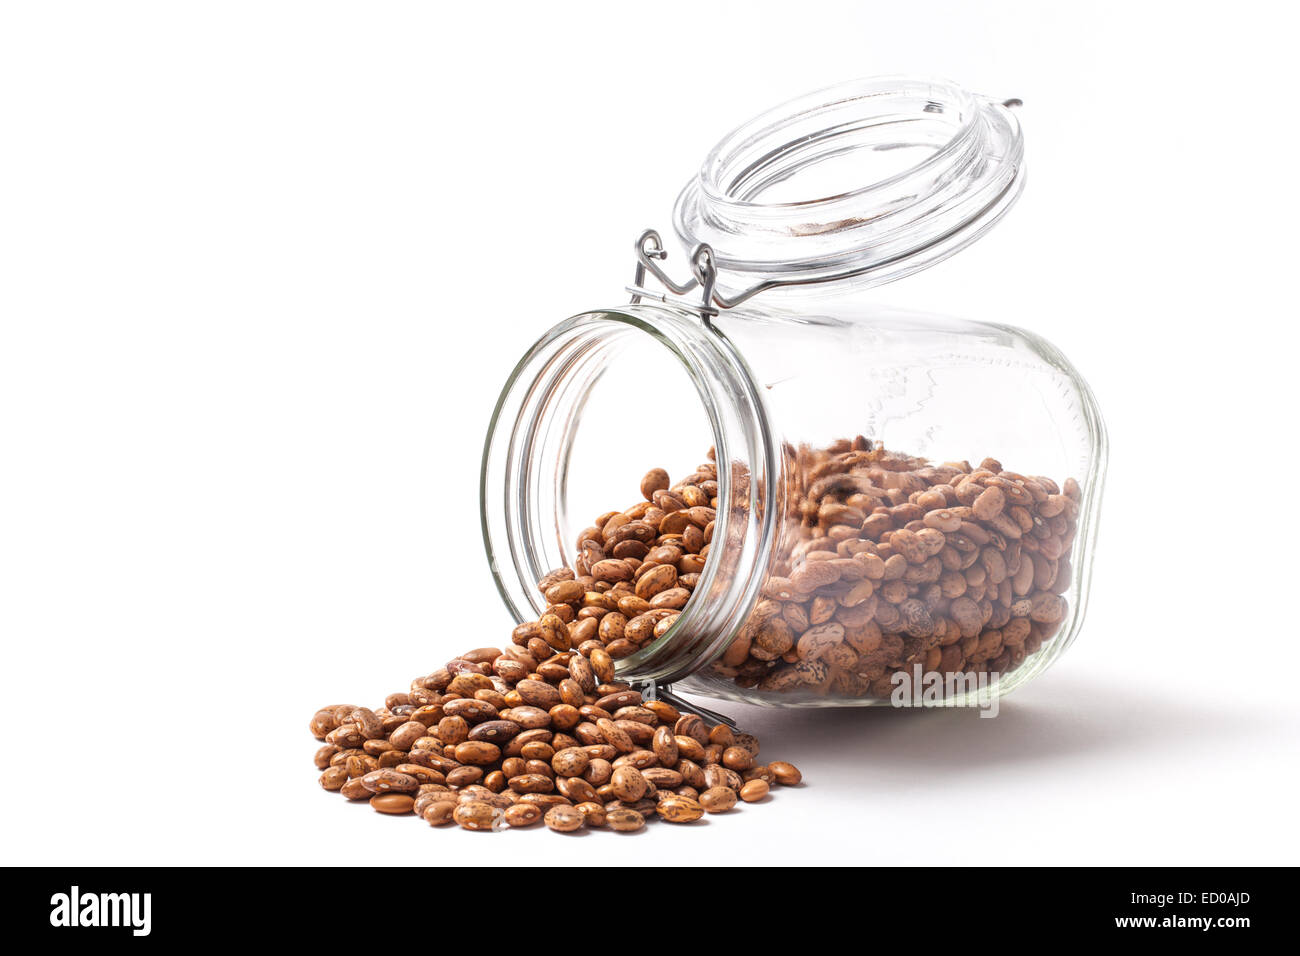 Image of pinto beans in an open jar isolated on white. Stock Photo